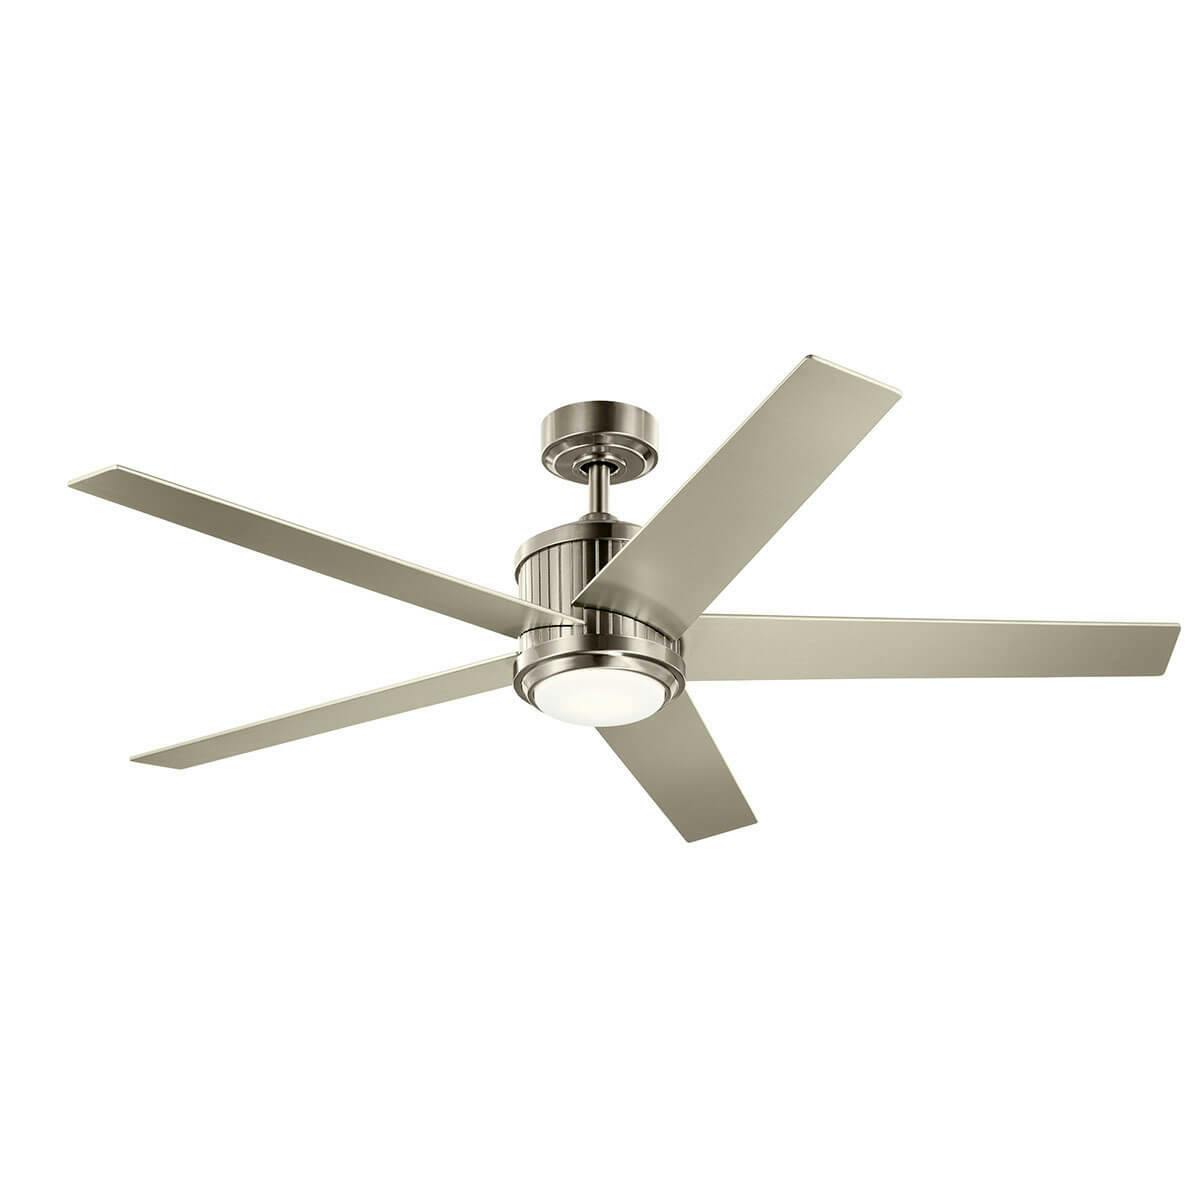 56” Brahm Ceiling Fan Stainless Steel on a white background